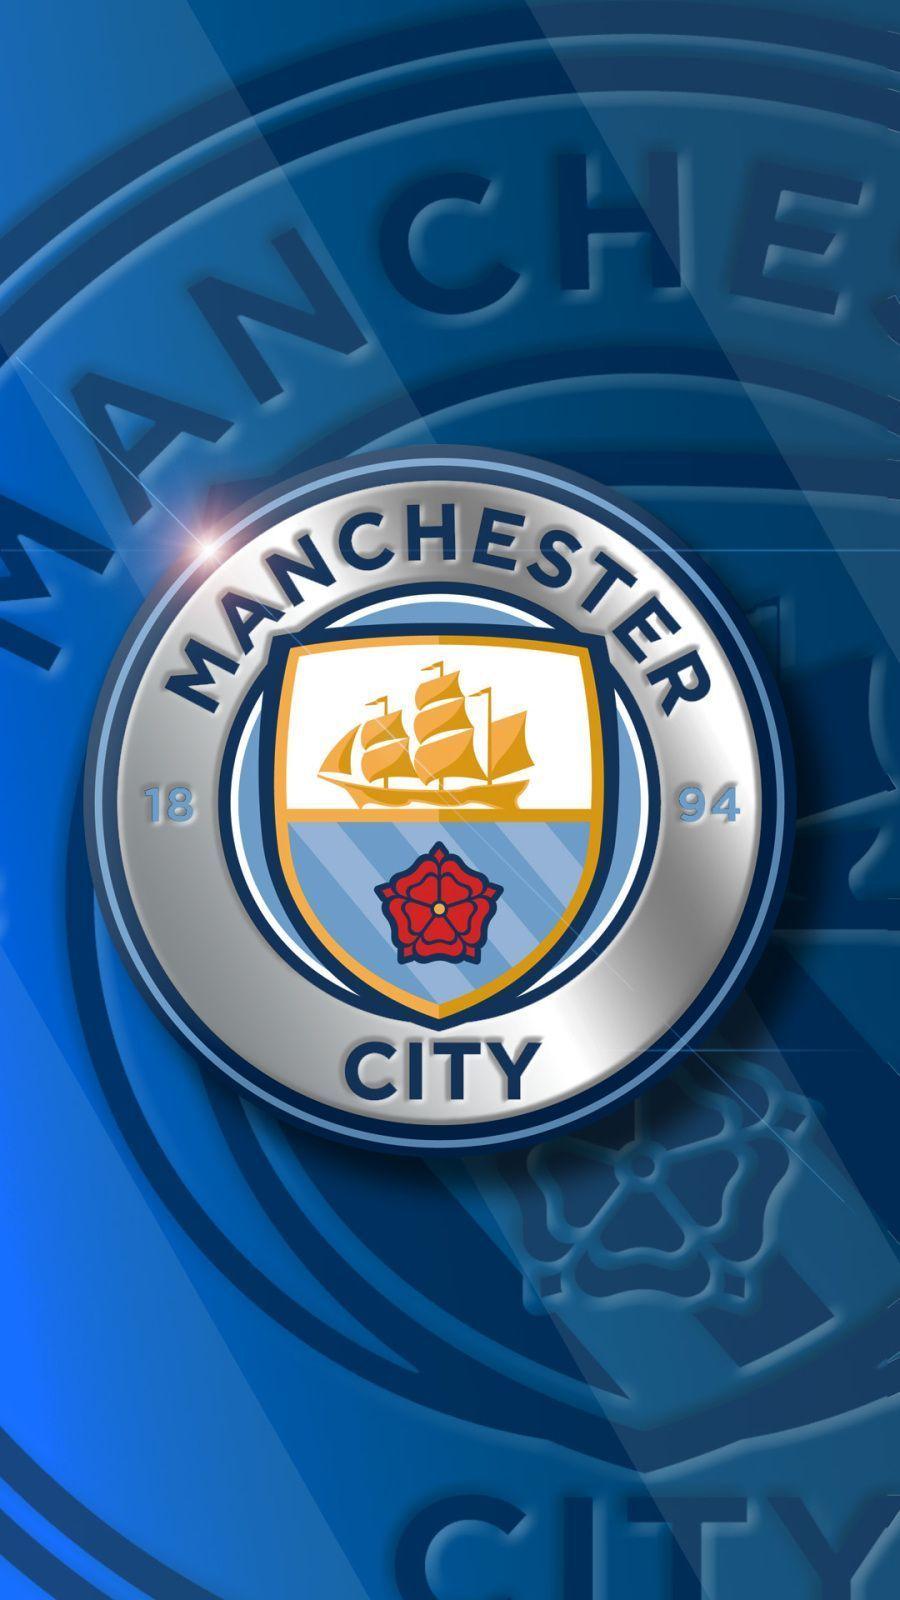 Manchester City Iphone Wallpapers Top Free Manchester City Iphone Backgrounds Wallpaperaccess